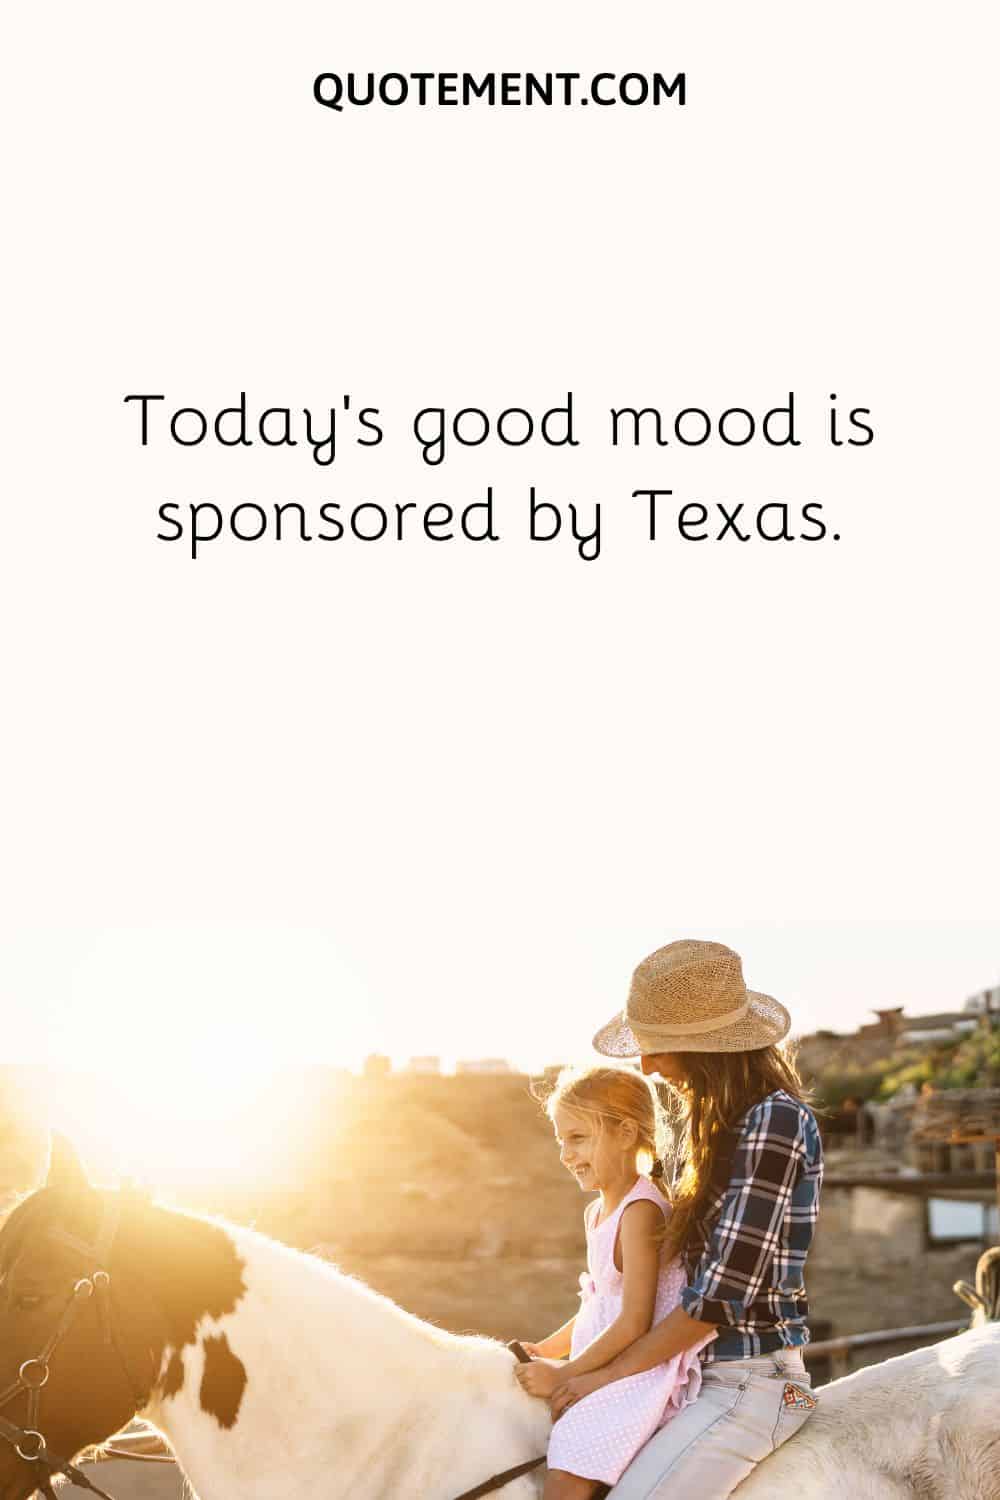 Today’s good mood is sponsored by Texas.